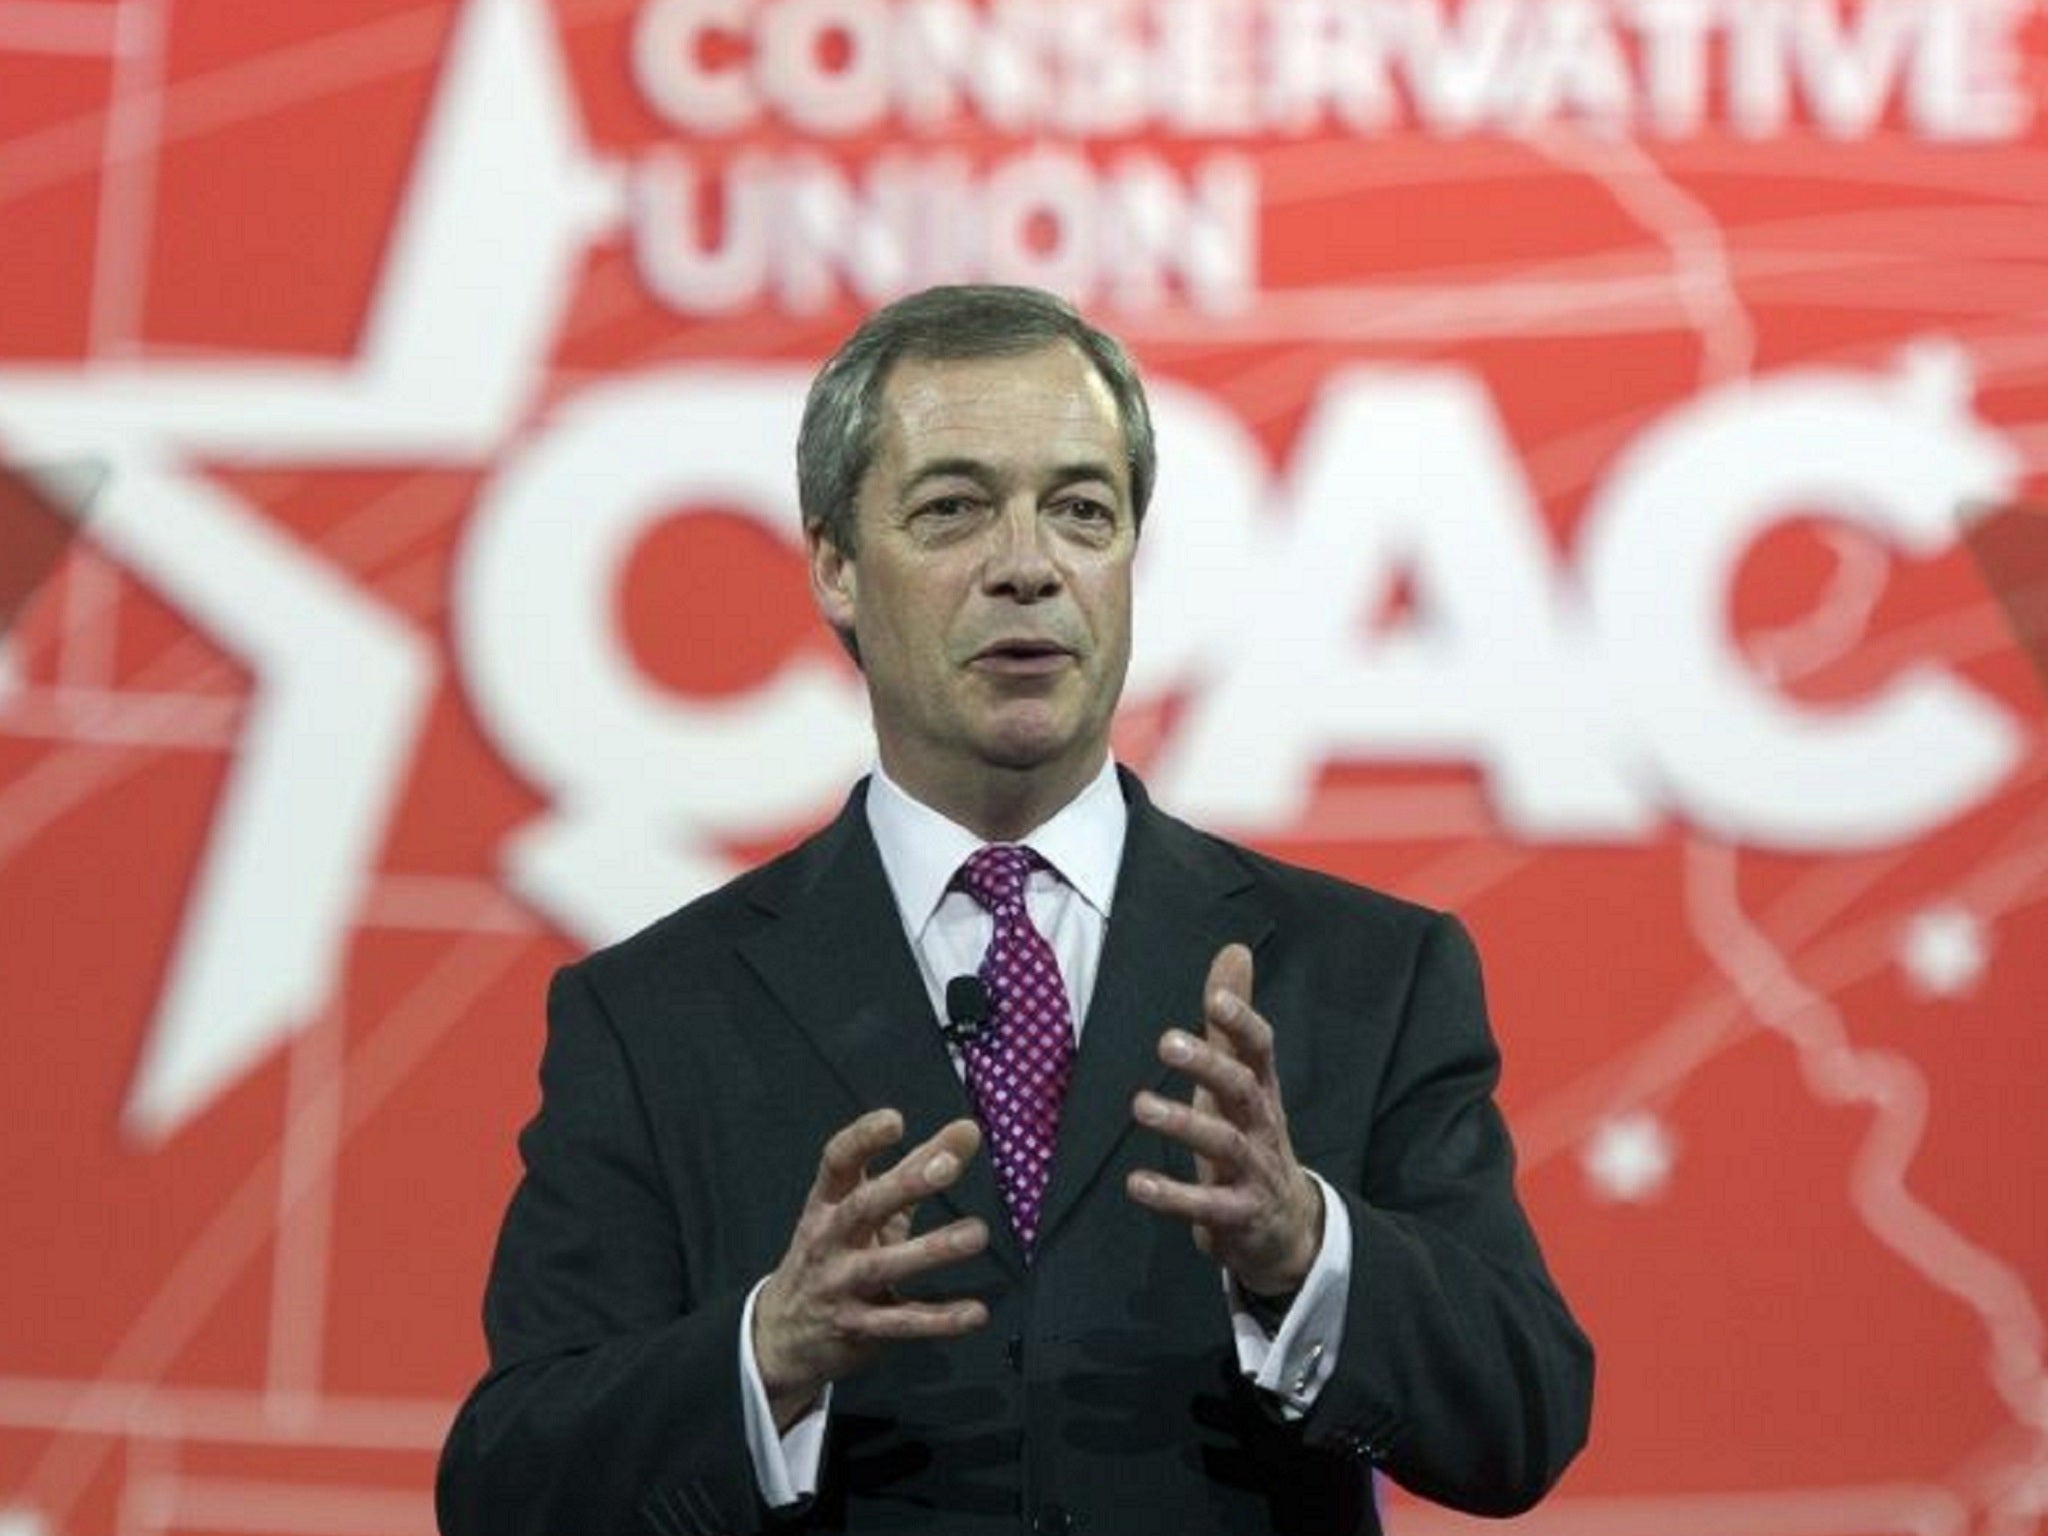 Nigel Farage at the Conservative Political Action Conference last night